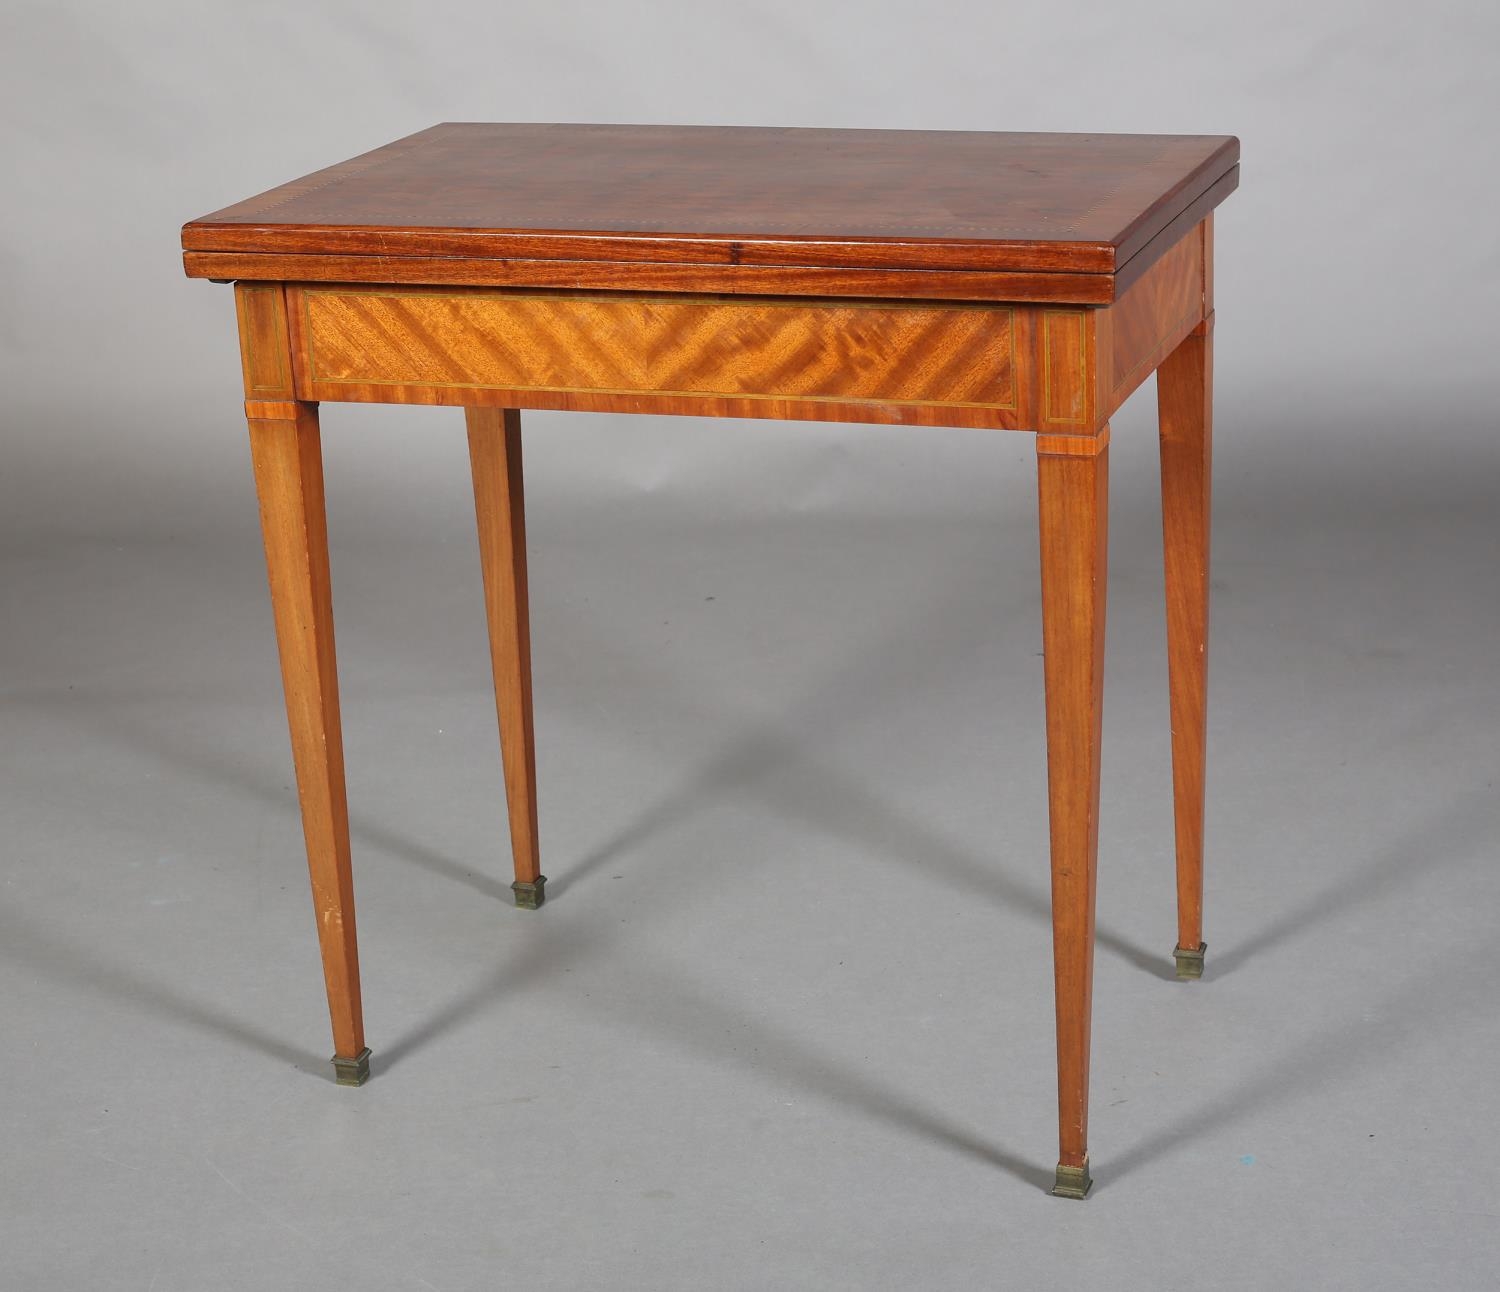 AN EARLY 20TH CENTURY MAHOGANY AND SATIN WALNUT PARQUETRY CARD, WRITING AND DRESSING TABLE inlaid